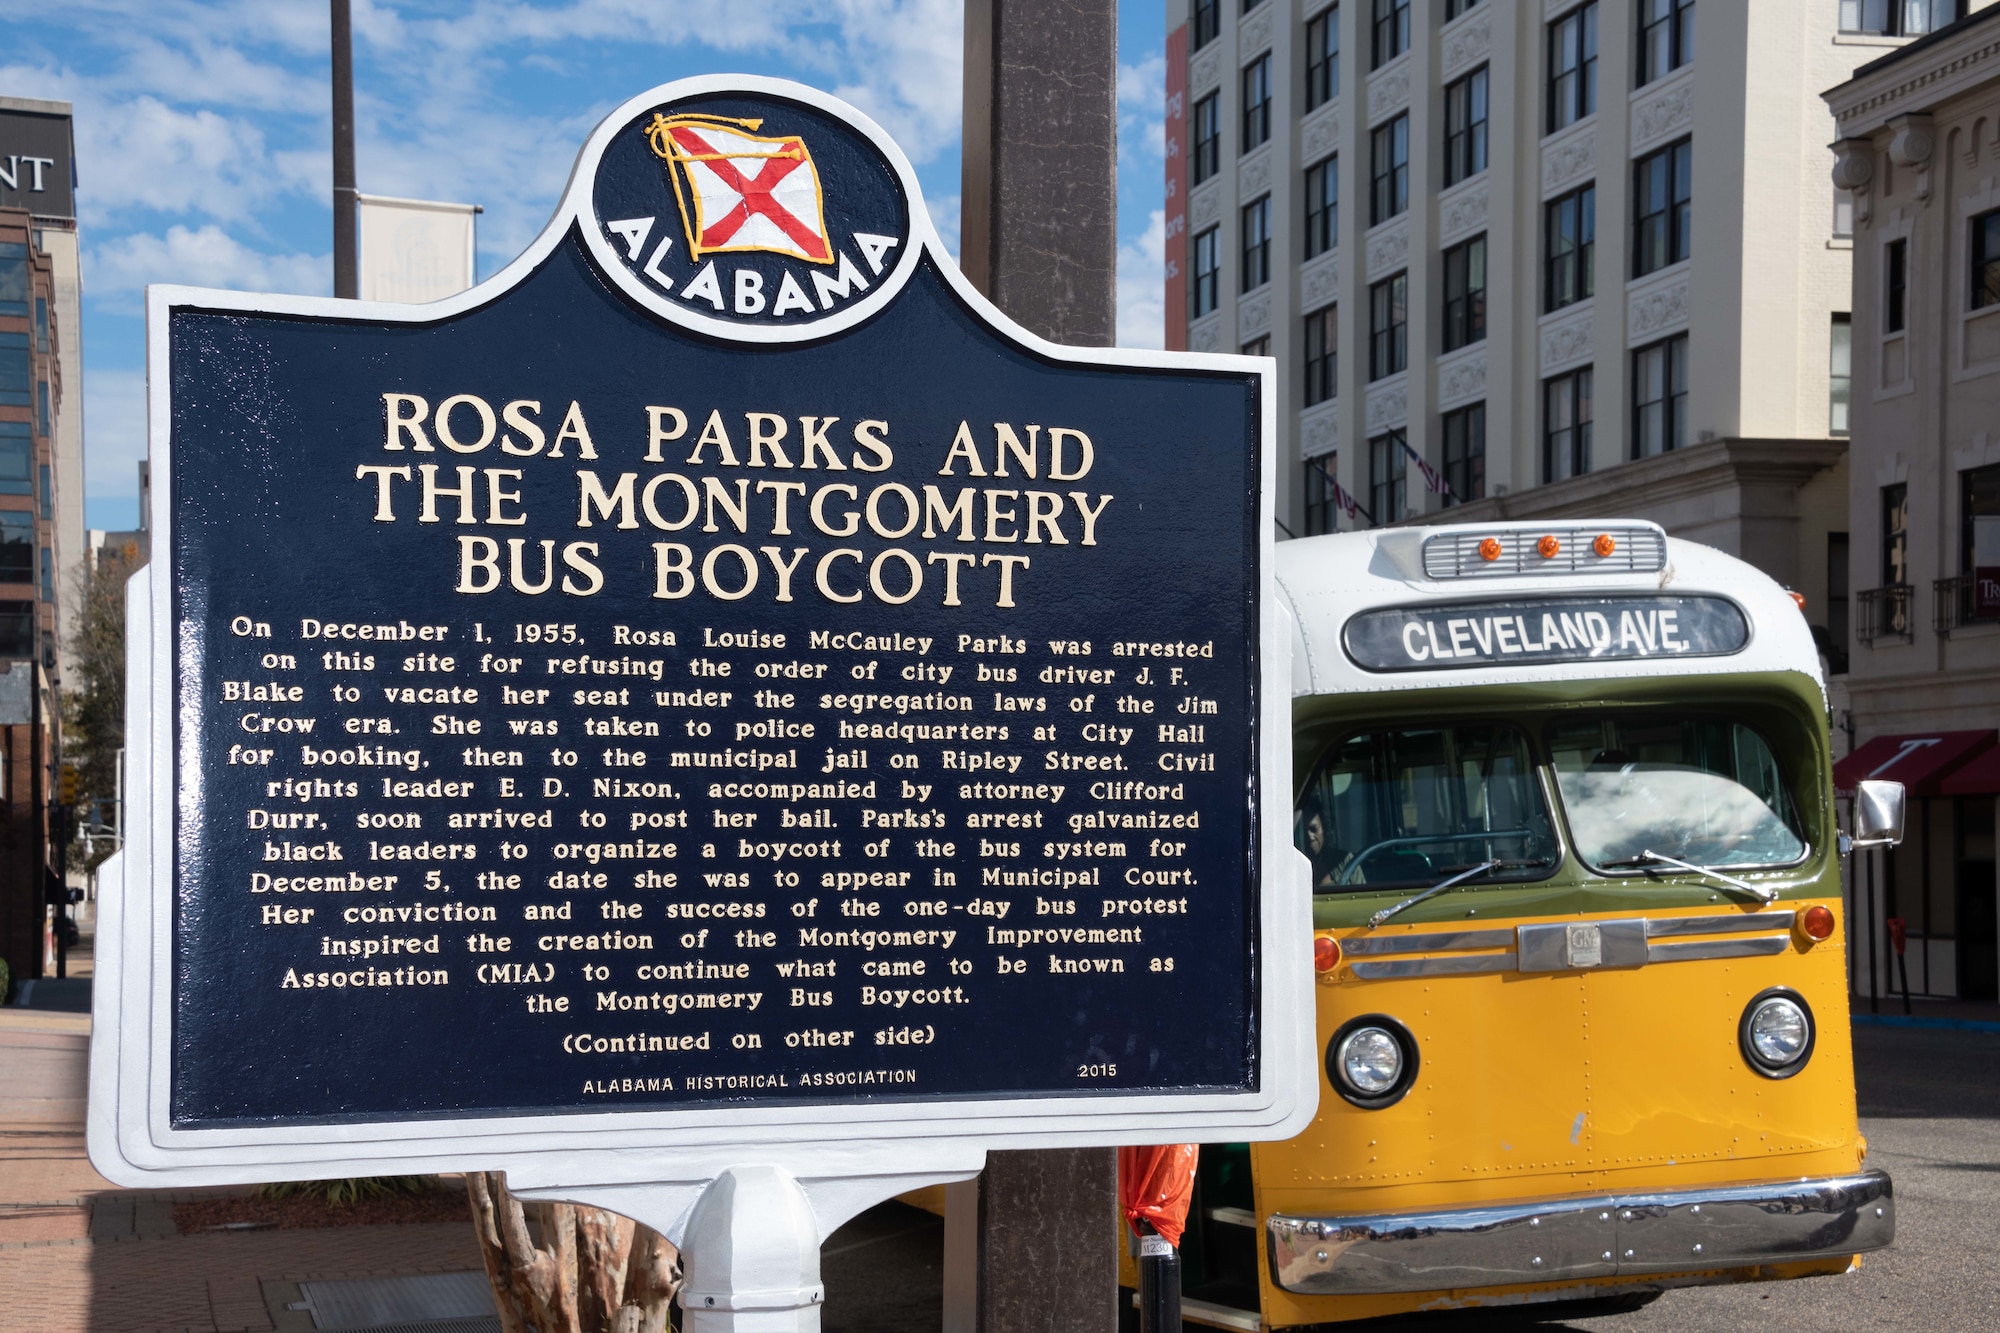 Air Force leaders and Montgomery community members honor Rosa Parks on the 66th anniversary of the Montgomery Bus Boycott